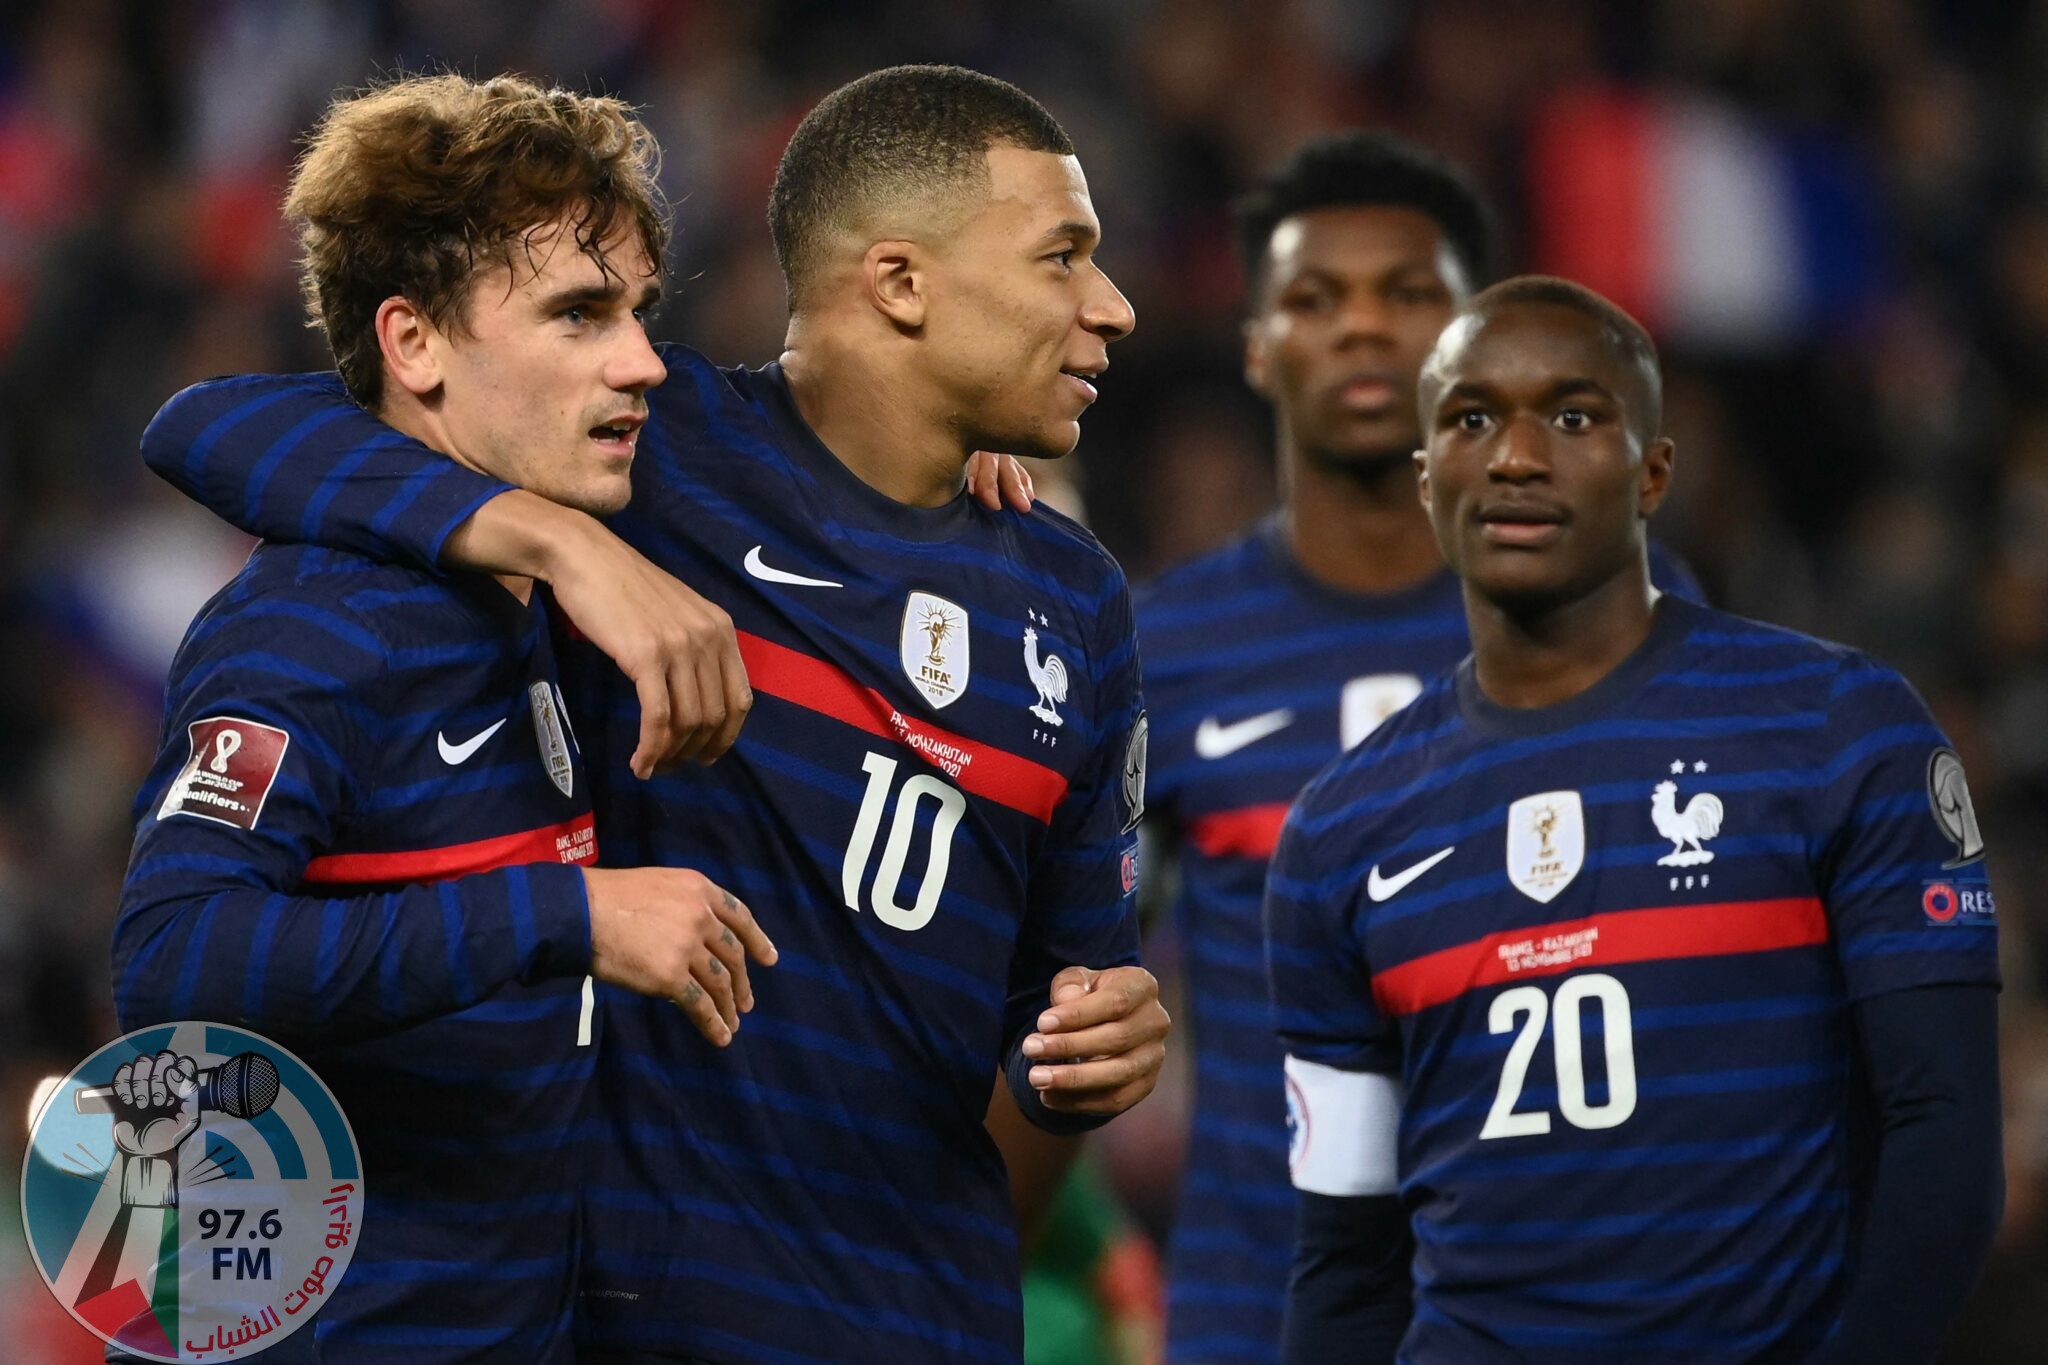 France's forward Antoine Griezmann (L) celebrates with France's forward Kylian Mbappe (C) after scoring a goal during the FIFA World Cup 2022 qualification football match between France and Kazakhstan at the Parc des Princes stadium in Paris, on November 13, 2021. (Photo by FRANCK FIFE / AFP)